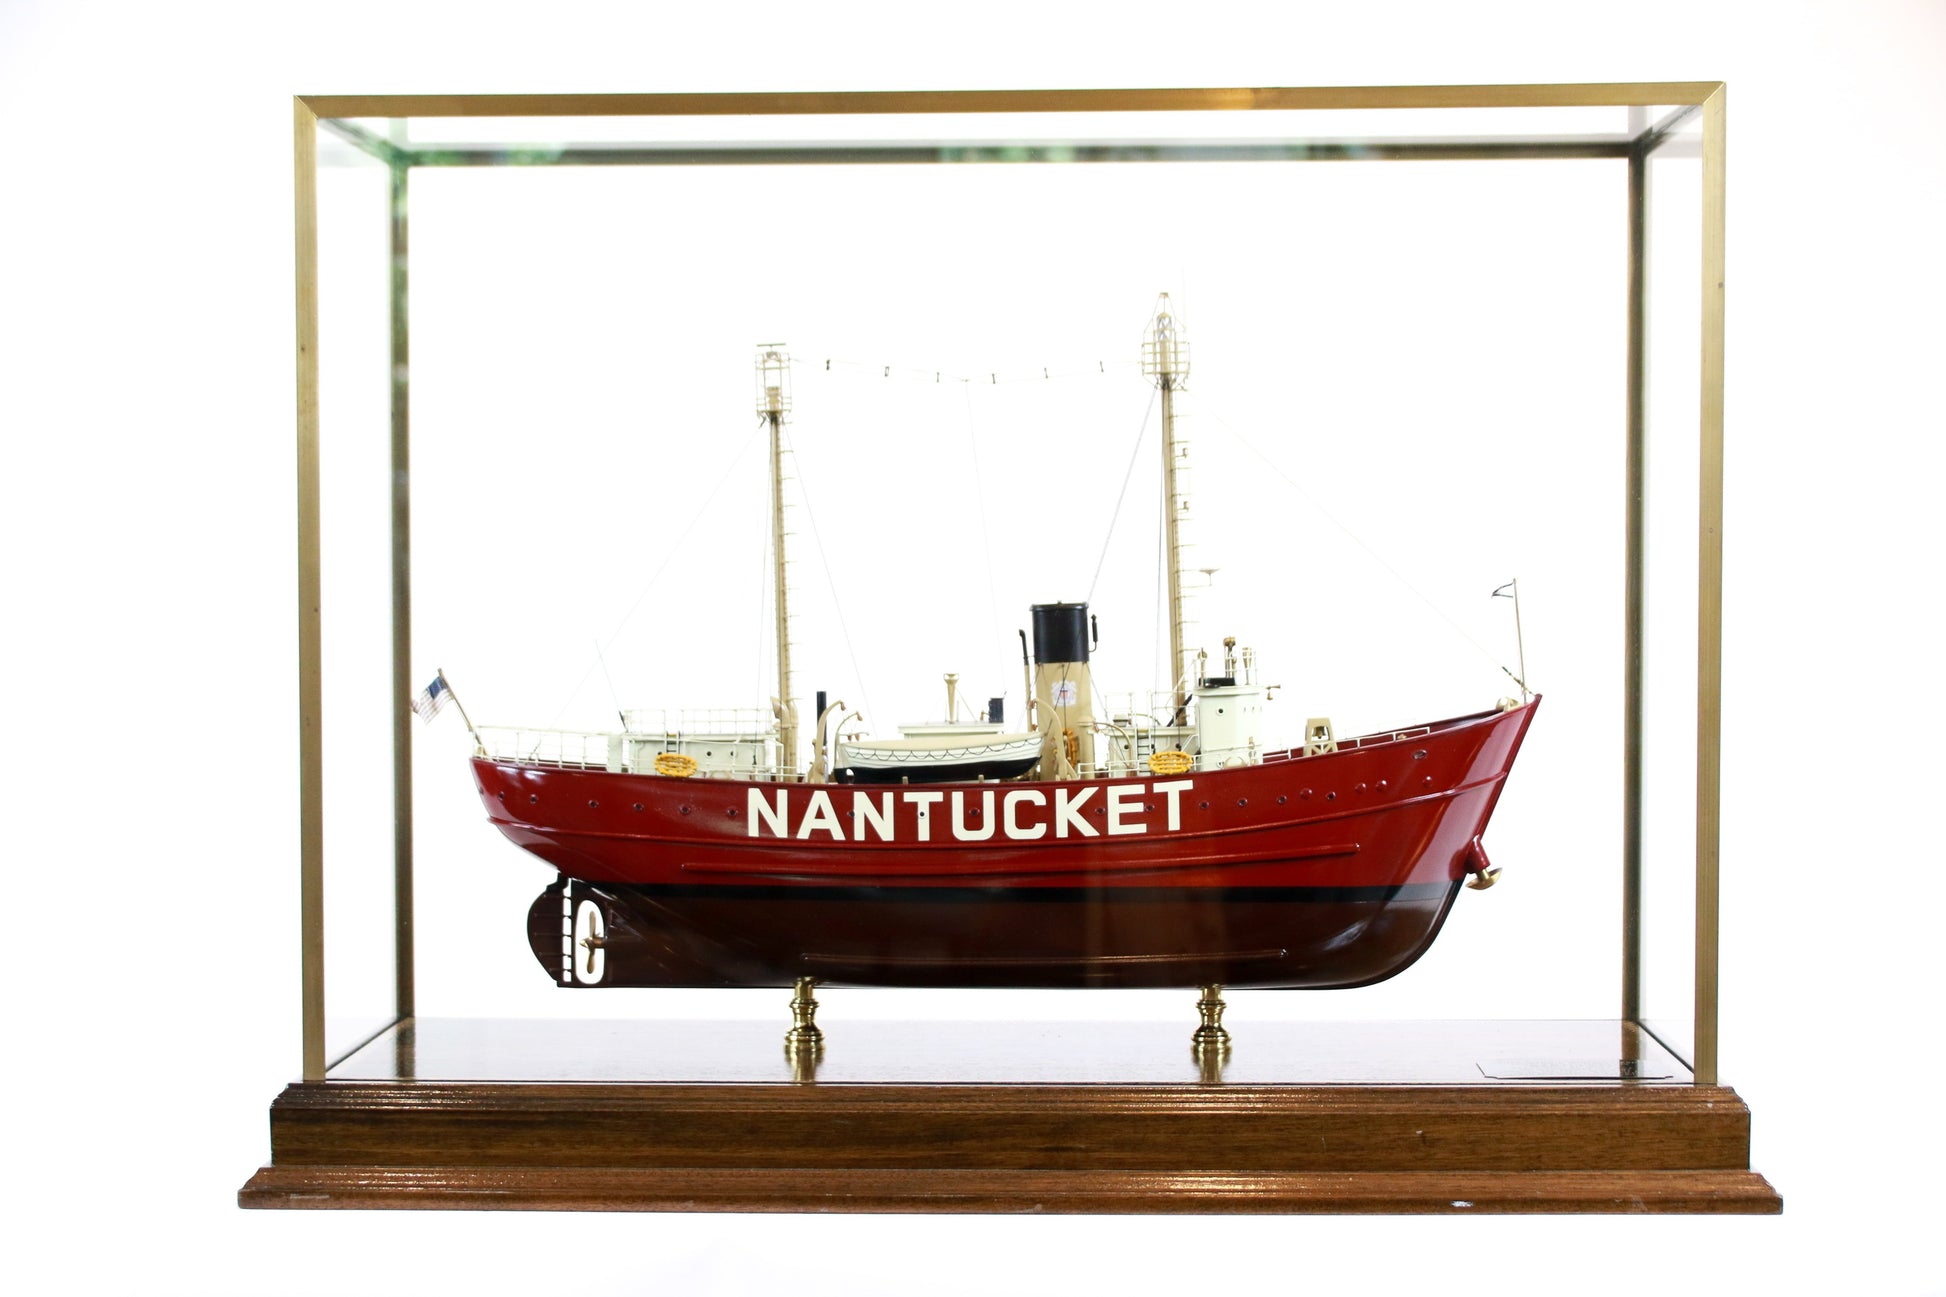 Aboard the Nantucket LV 112.. You are viewing the interior of the